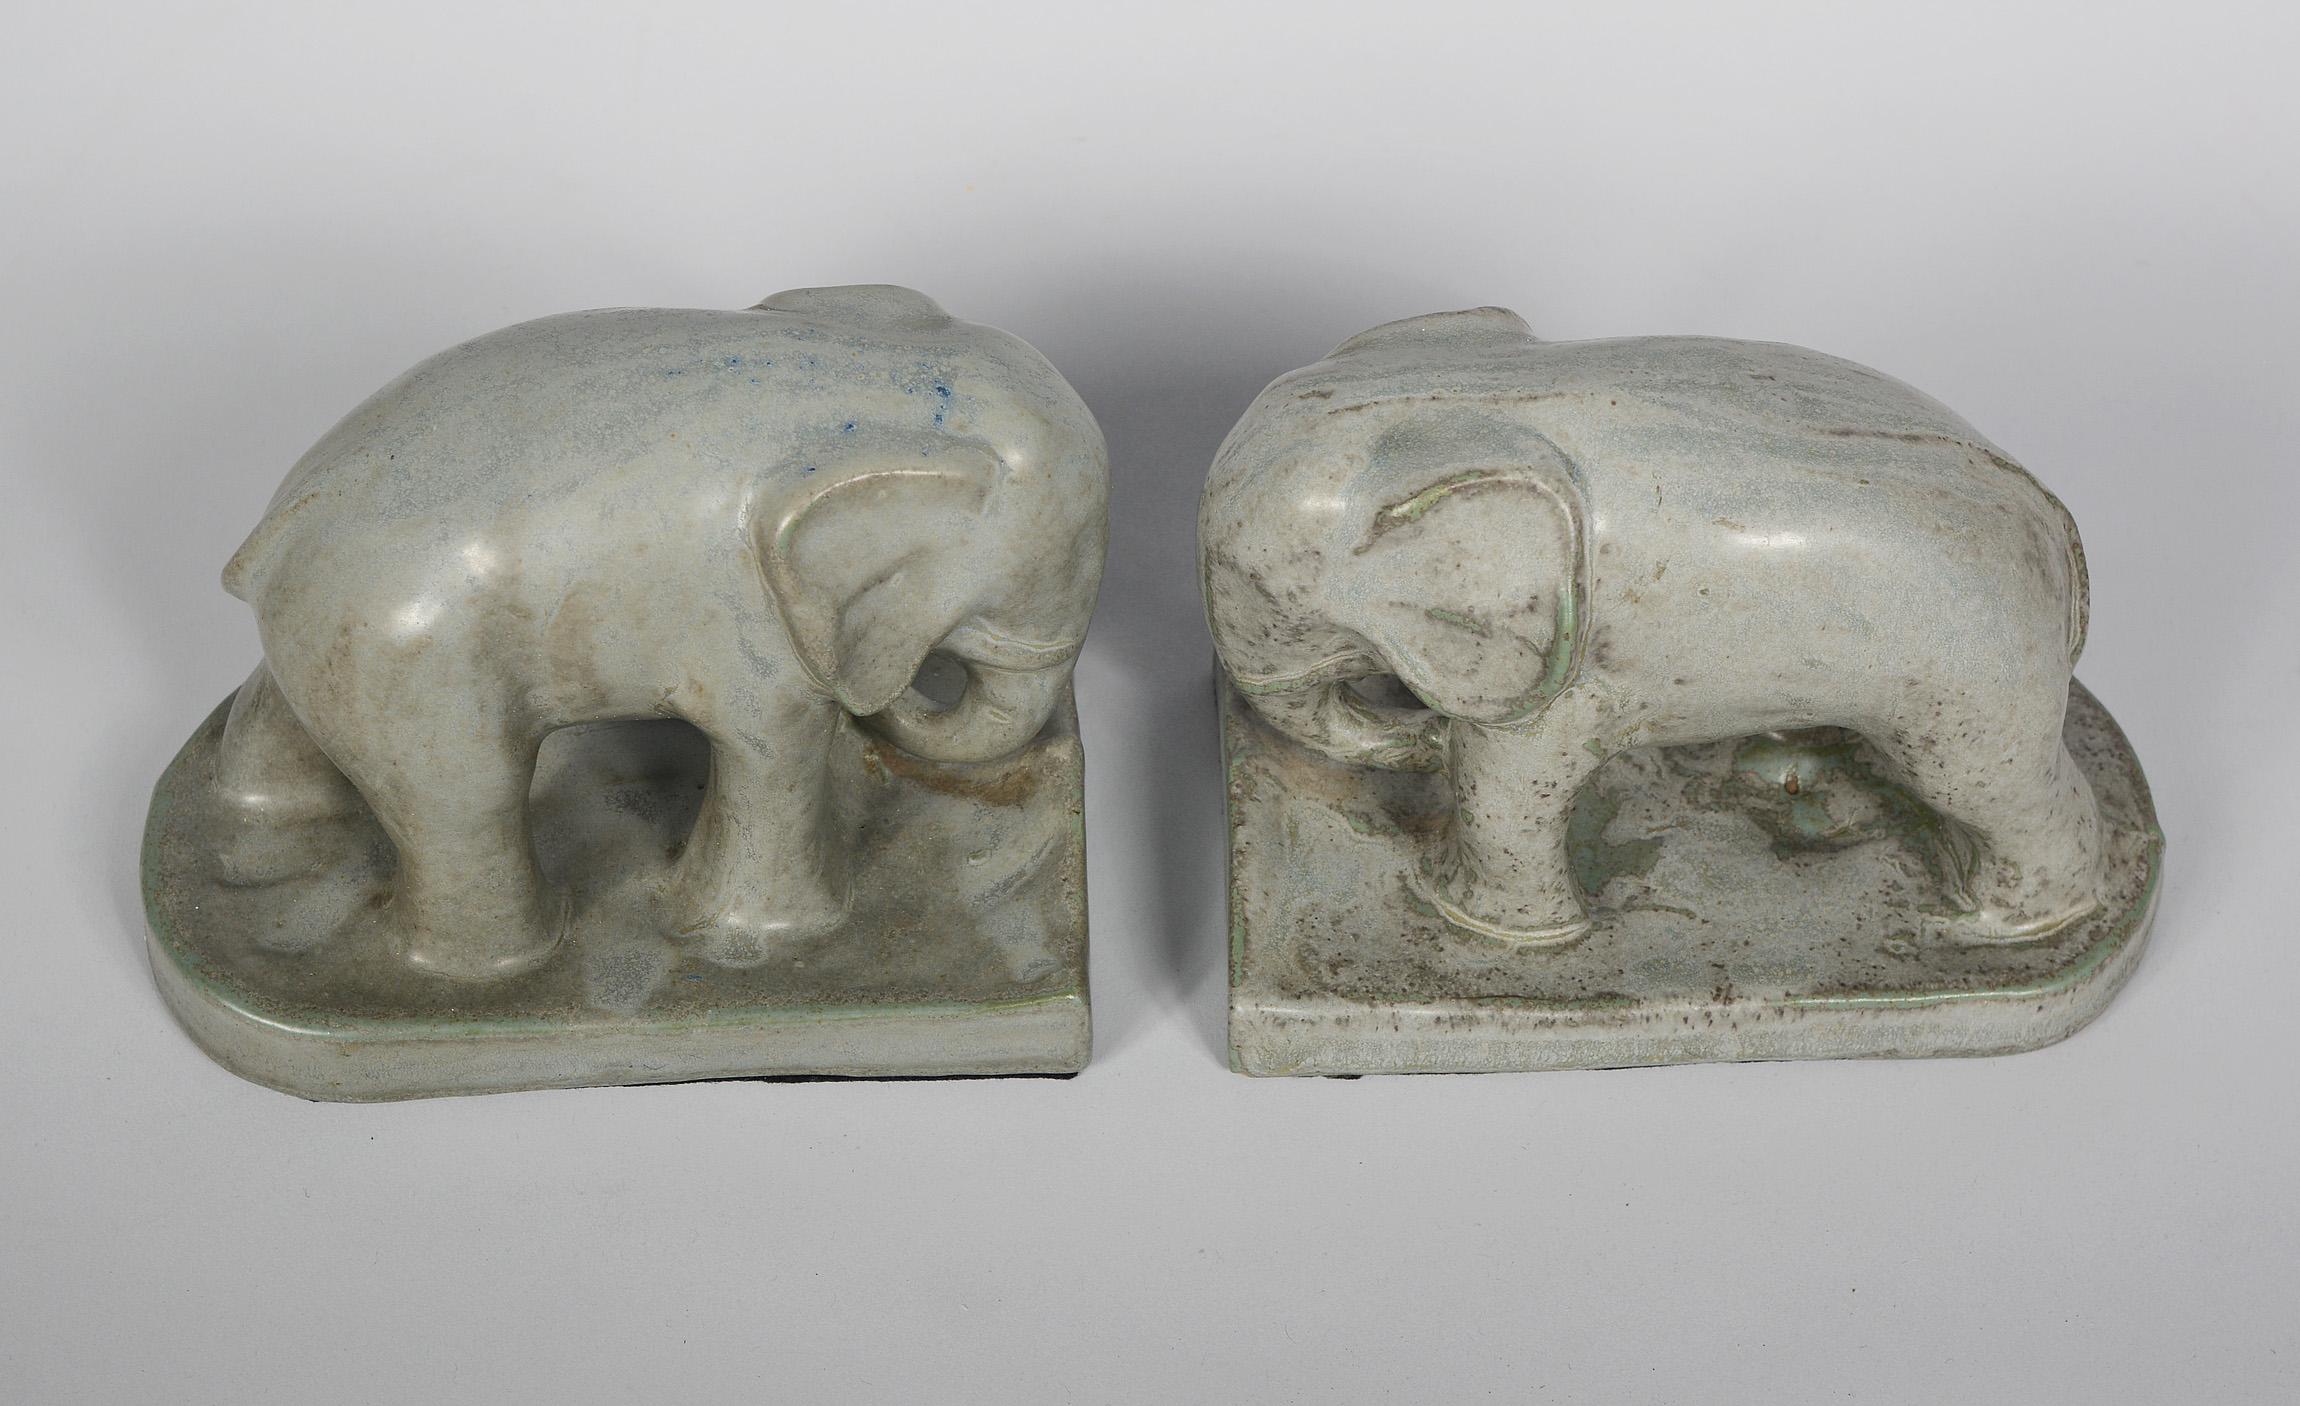 Pair of Arts and Crafts period ceramic elephant bookends. These are not marked. They have in the past been attributed to Monmouth Pottery. These have a great glaze with green mottling on the mainly grey field. There is a tiny glaze flake on the end